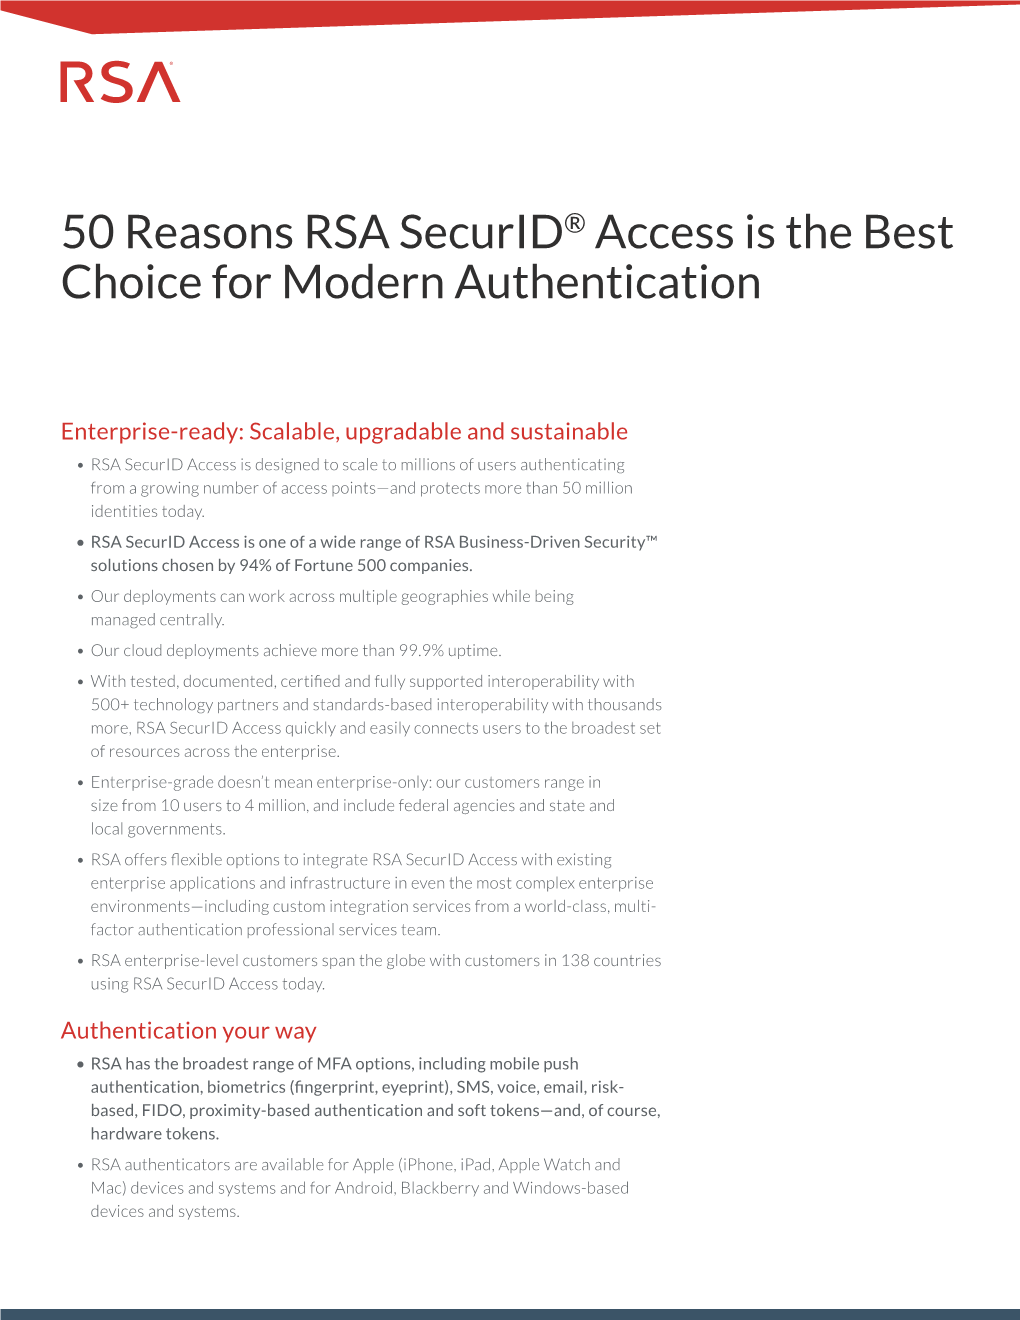 50 Reasons RSA Securid® Access Is the Best Choice for Modern Authentication